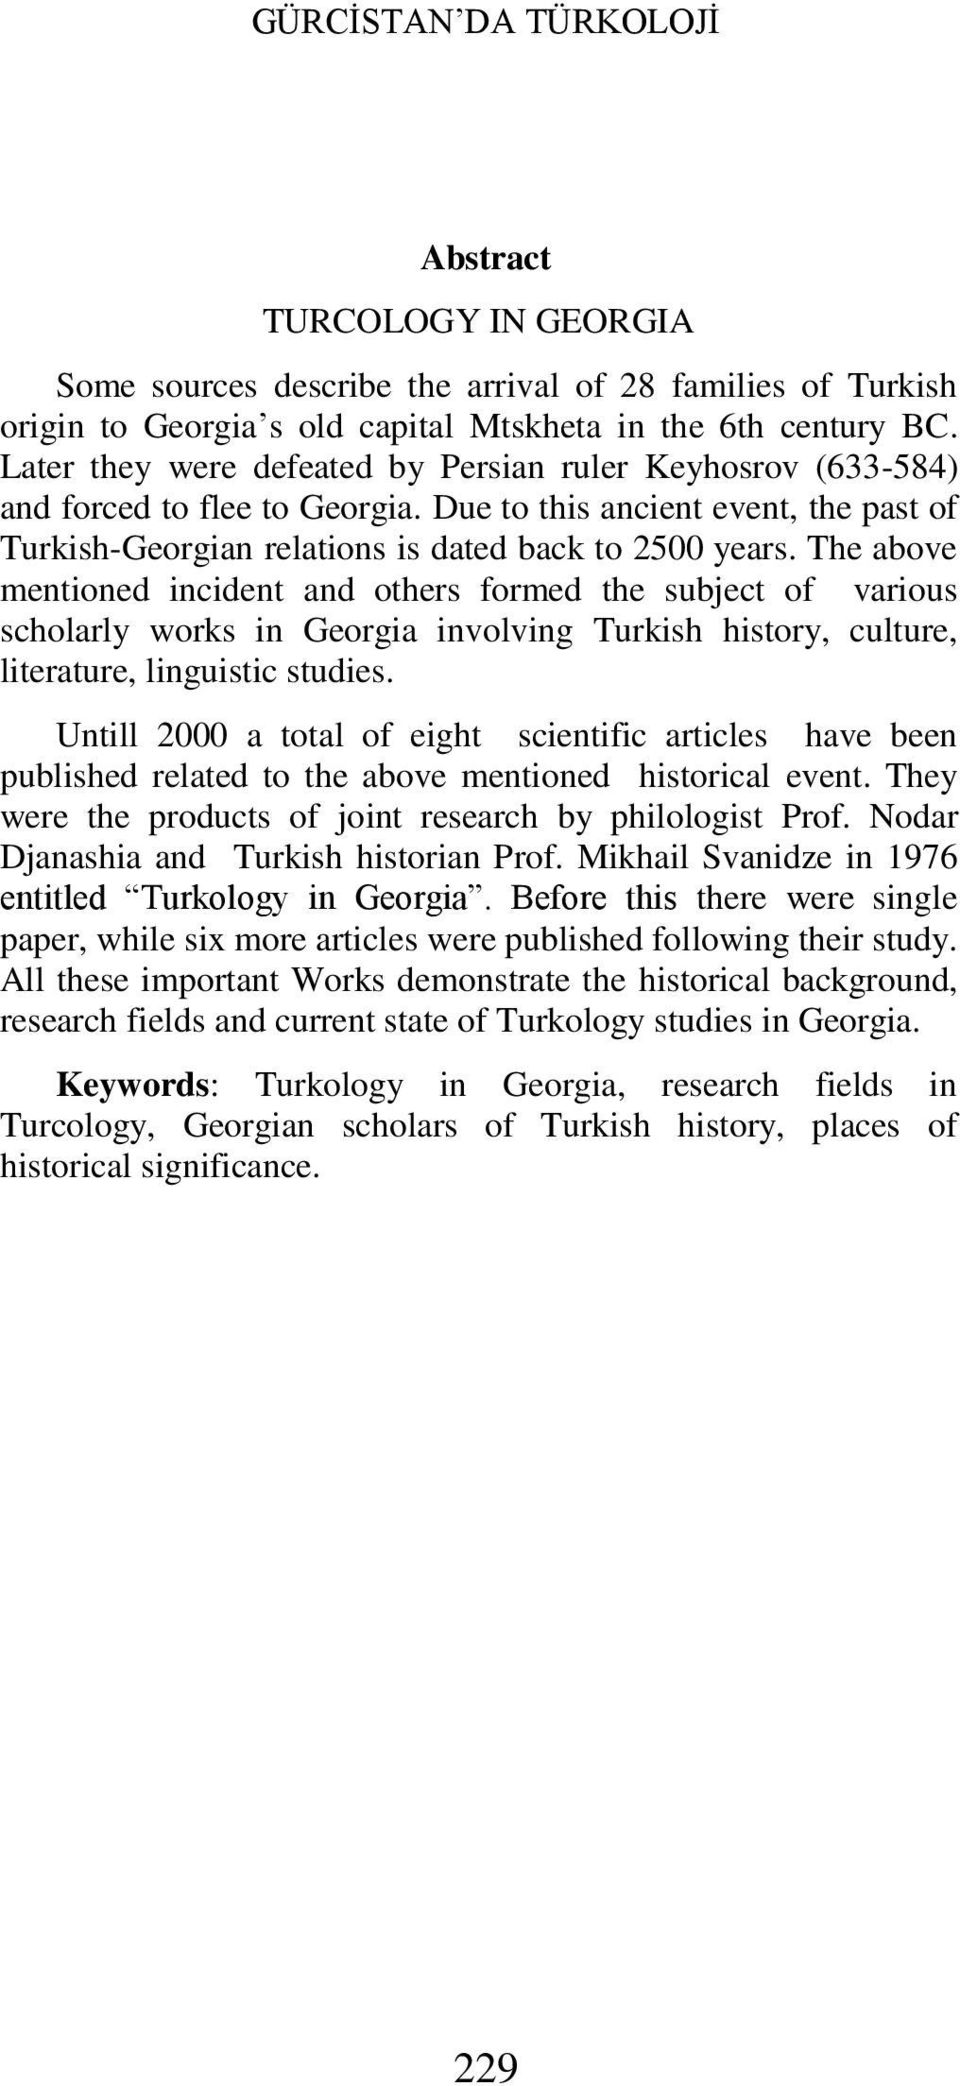 The above mentioned incident and others formed the subject of various scholarly works in Georgia involving Turkish history, culture, literature, linguistic studies.